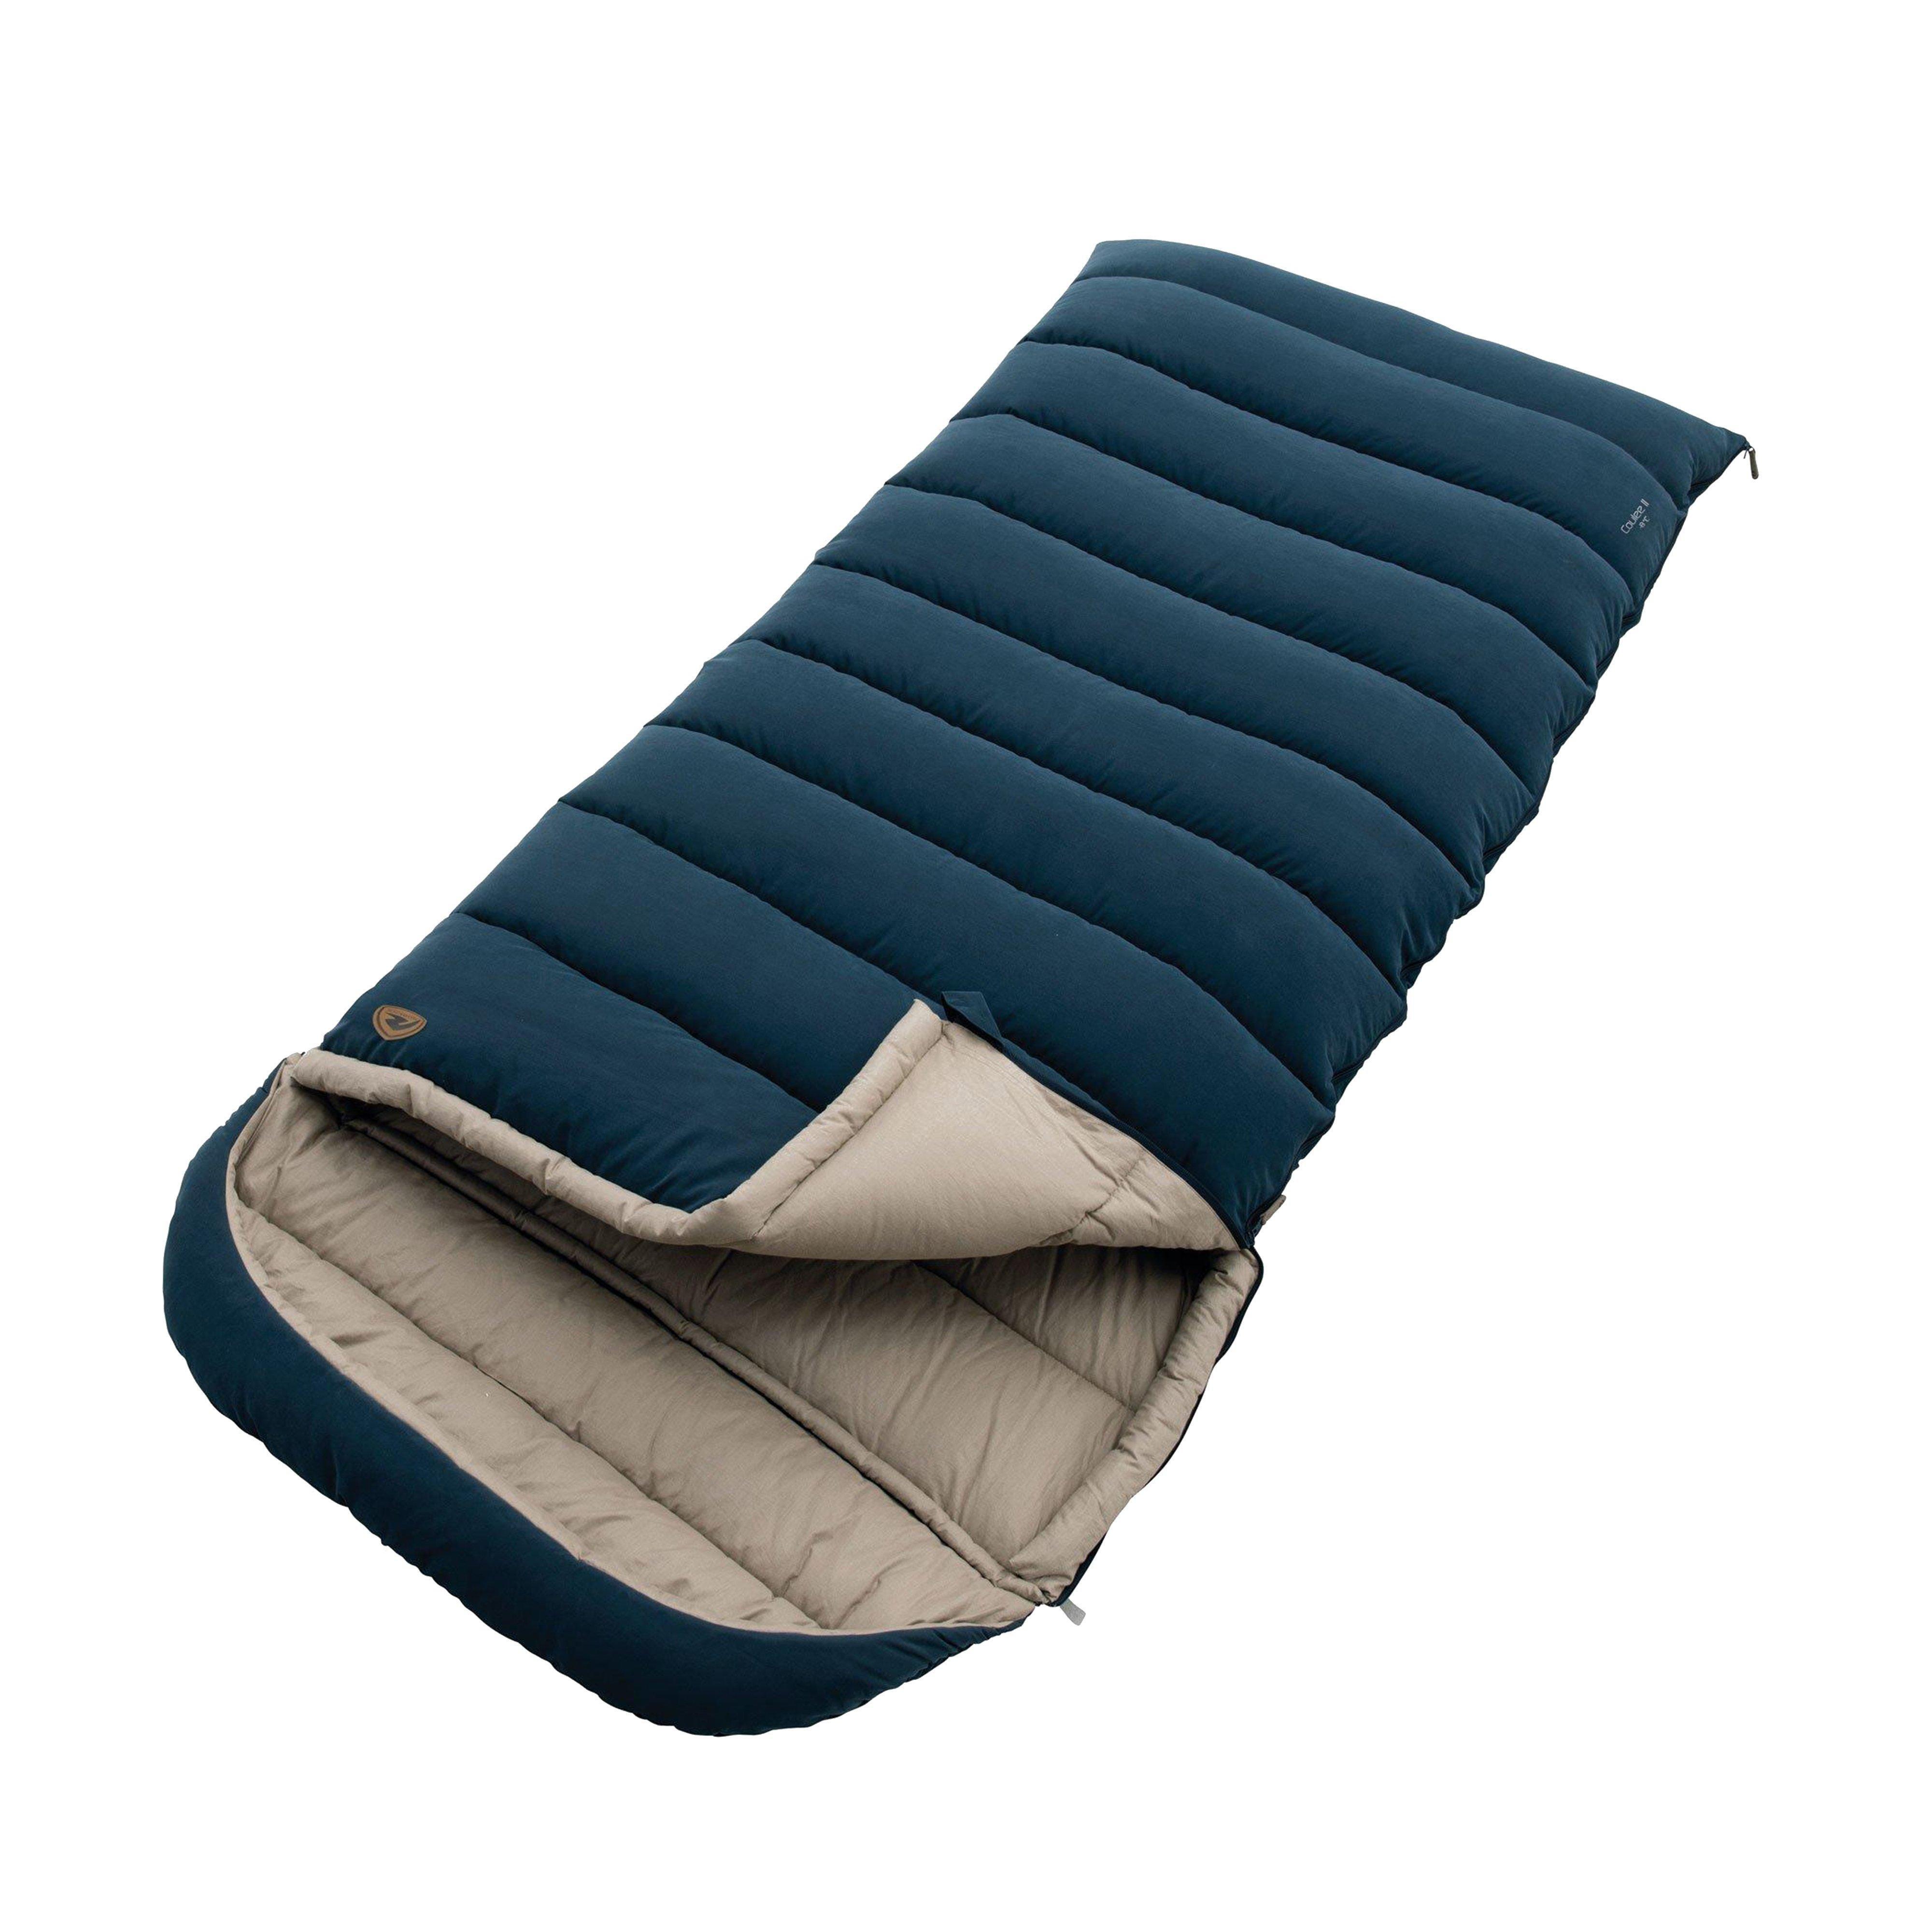 Robens The Coulee II Sleeping Bag Review